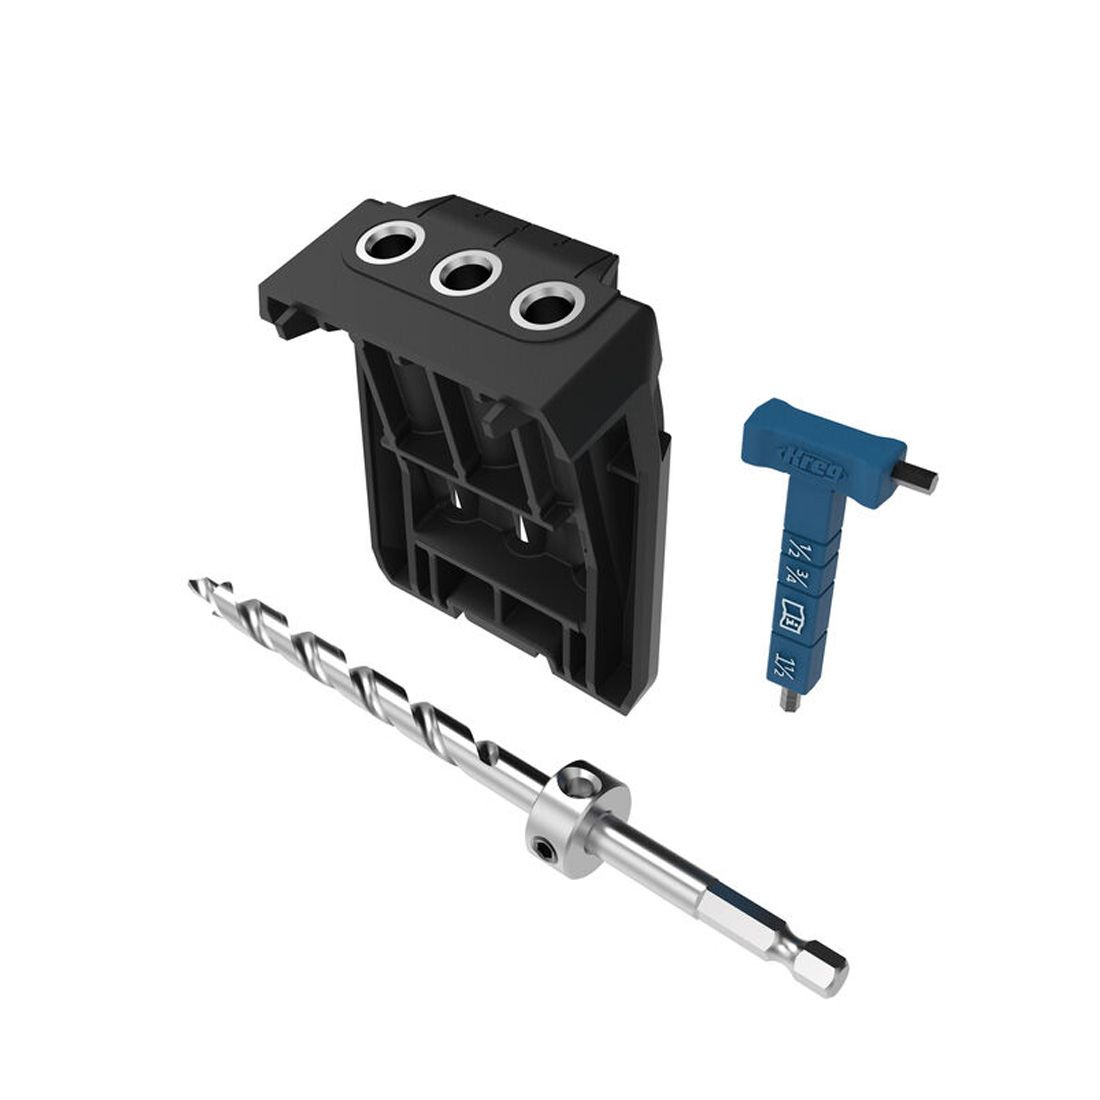 Kreg Jig Pocket-Hole Jig 720 Micro Drill Guide Kit, kit includes stepped drill bit with depth collar. and hex key which has depth markings for speedy set up